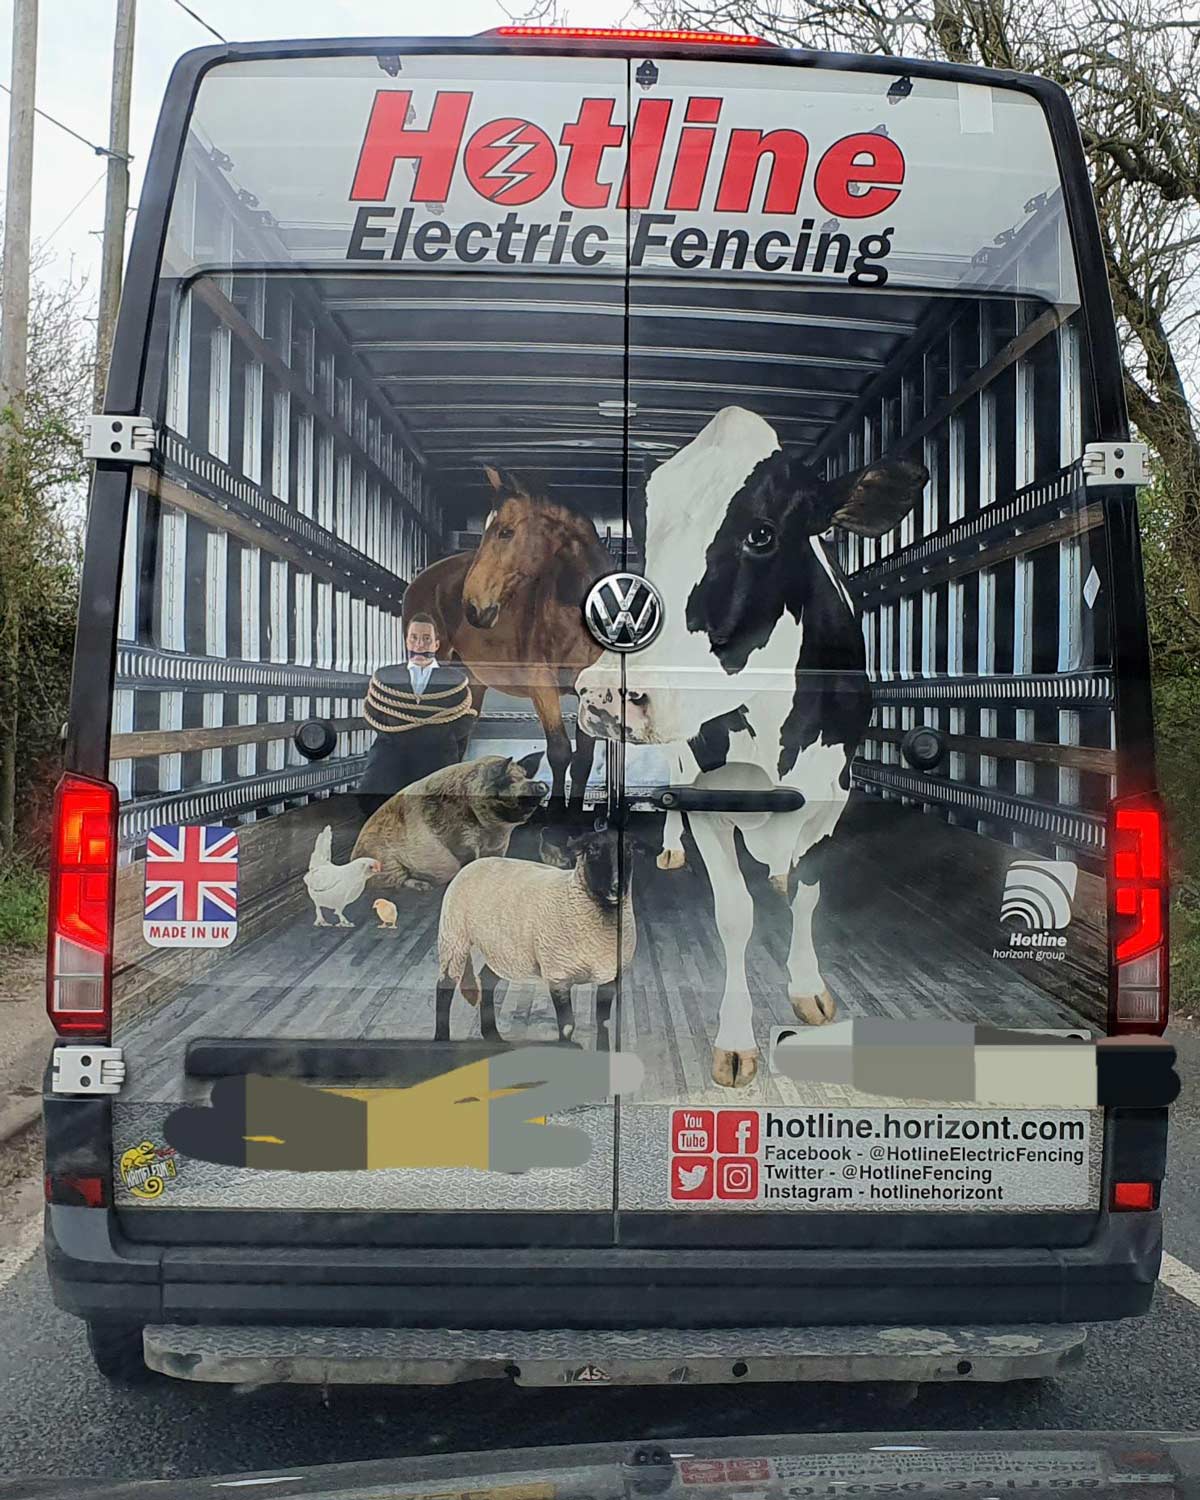 Stuck behind a van with some interesting artwork this morning...